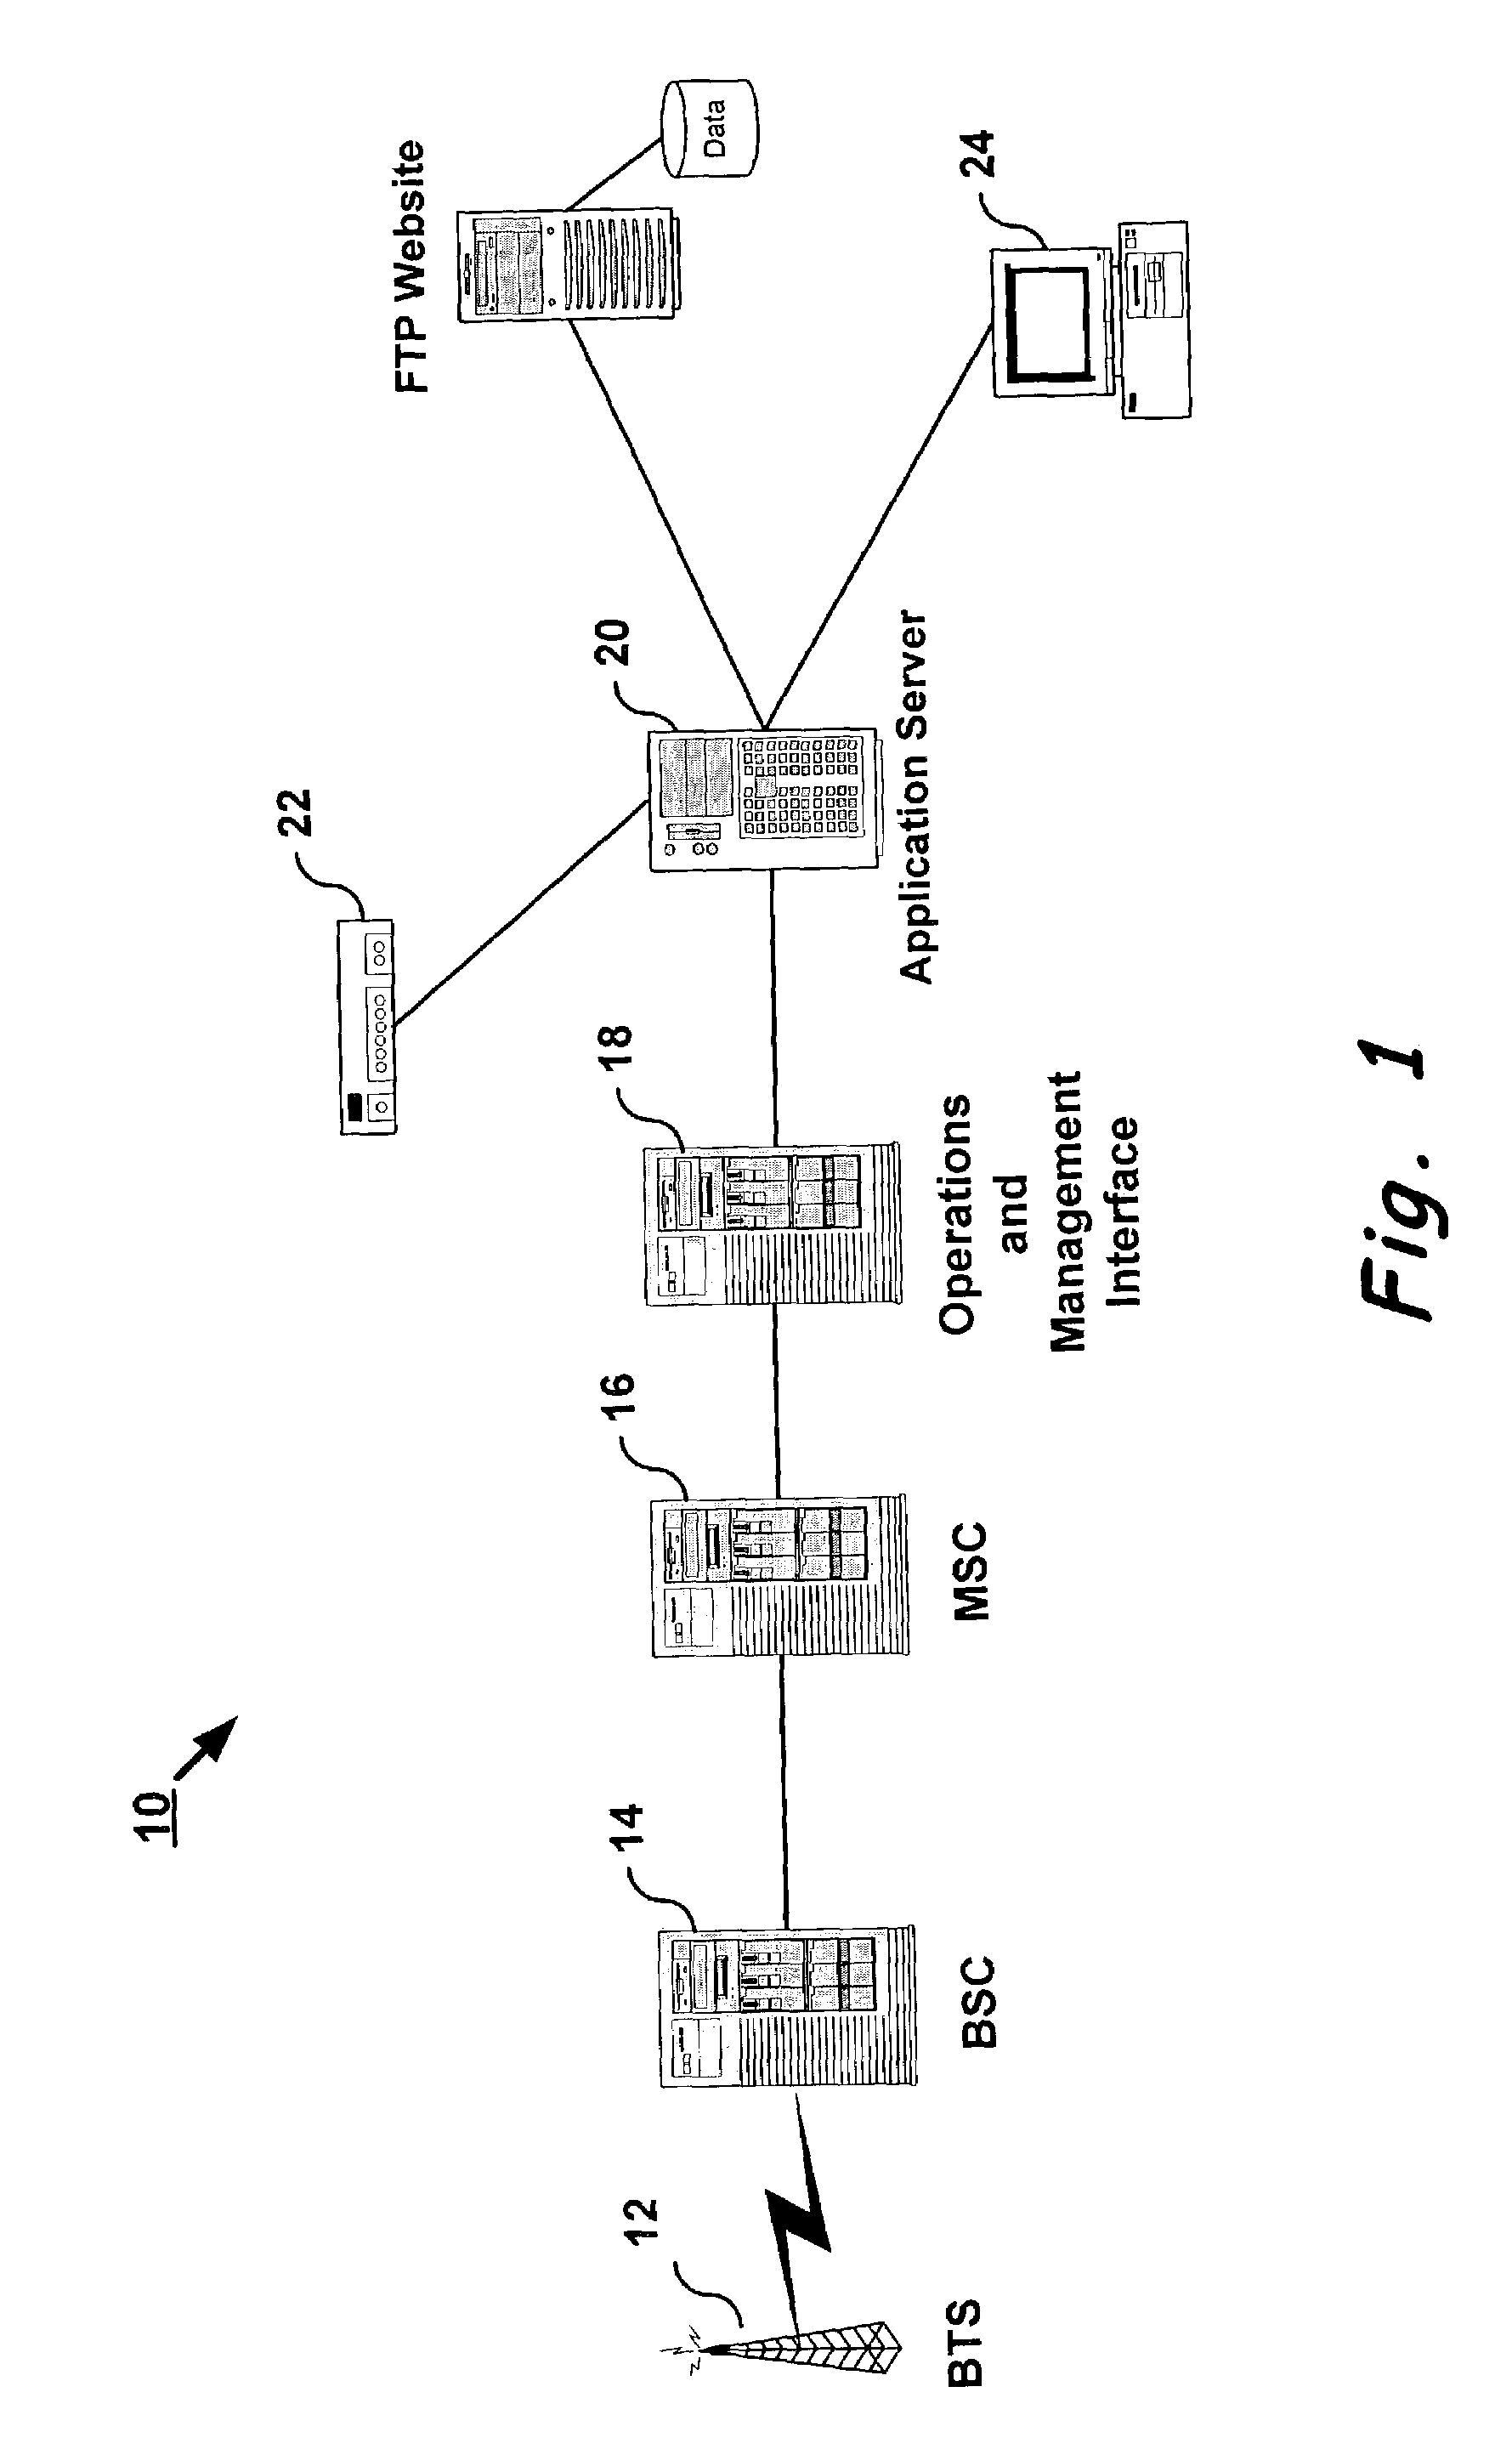 System for event correlation in cellular networks